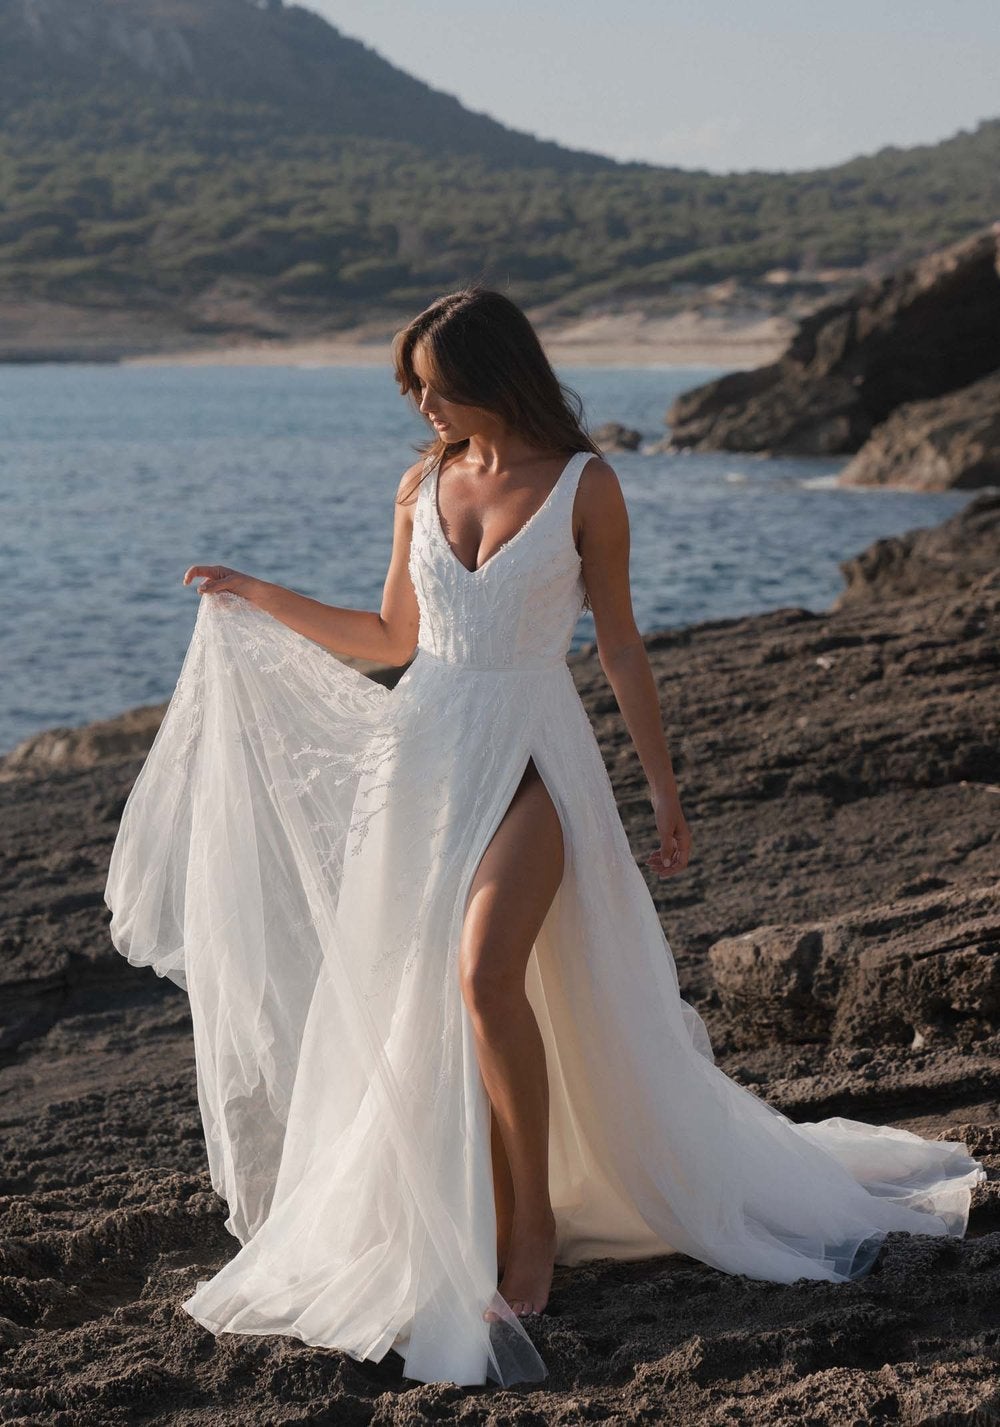 V-neck A-line Wedding Dress With Beaded Embroidery And Front Slit